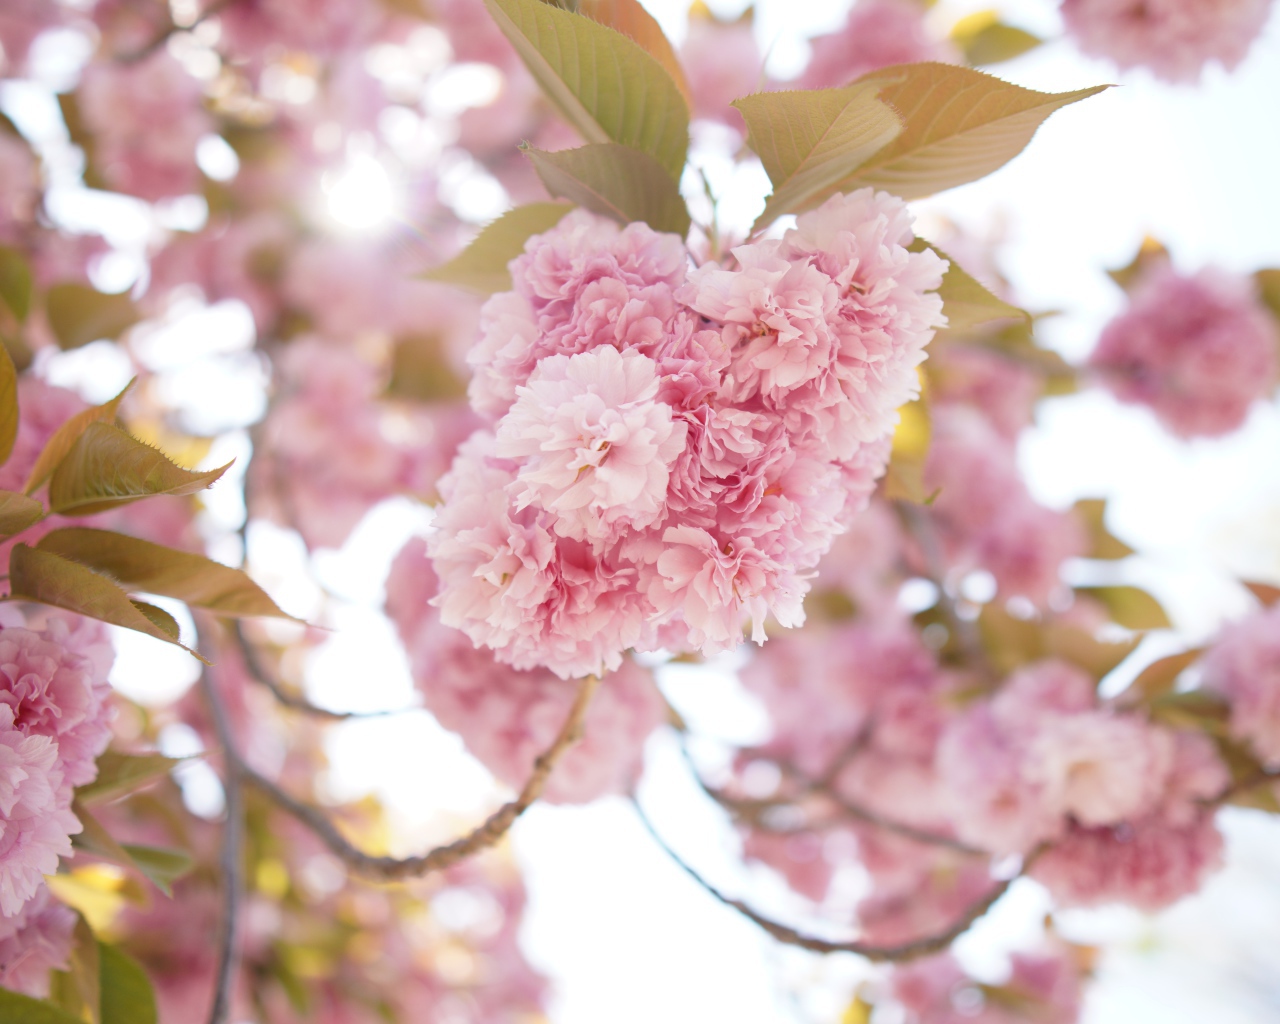 Pink lush flowers on a tree branch in spring